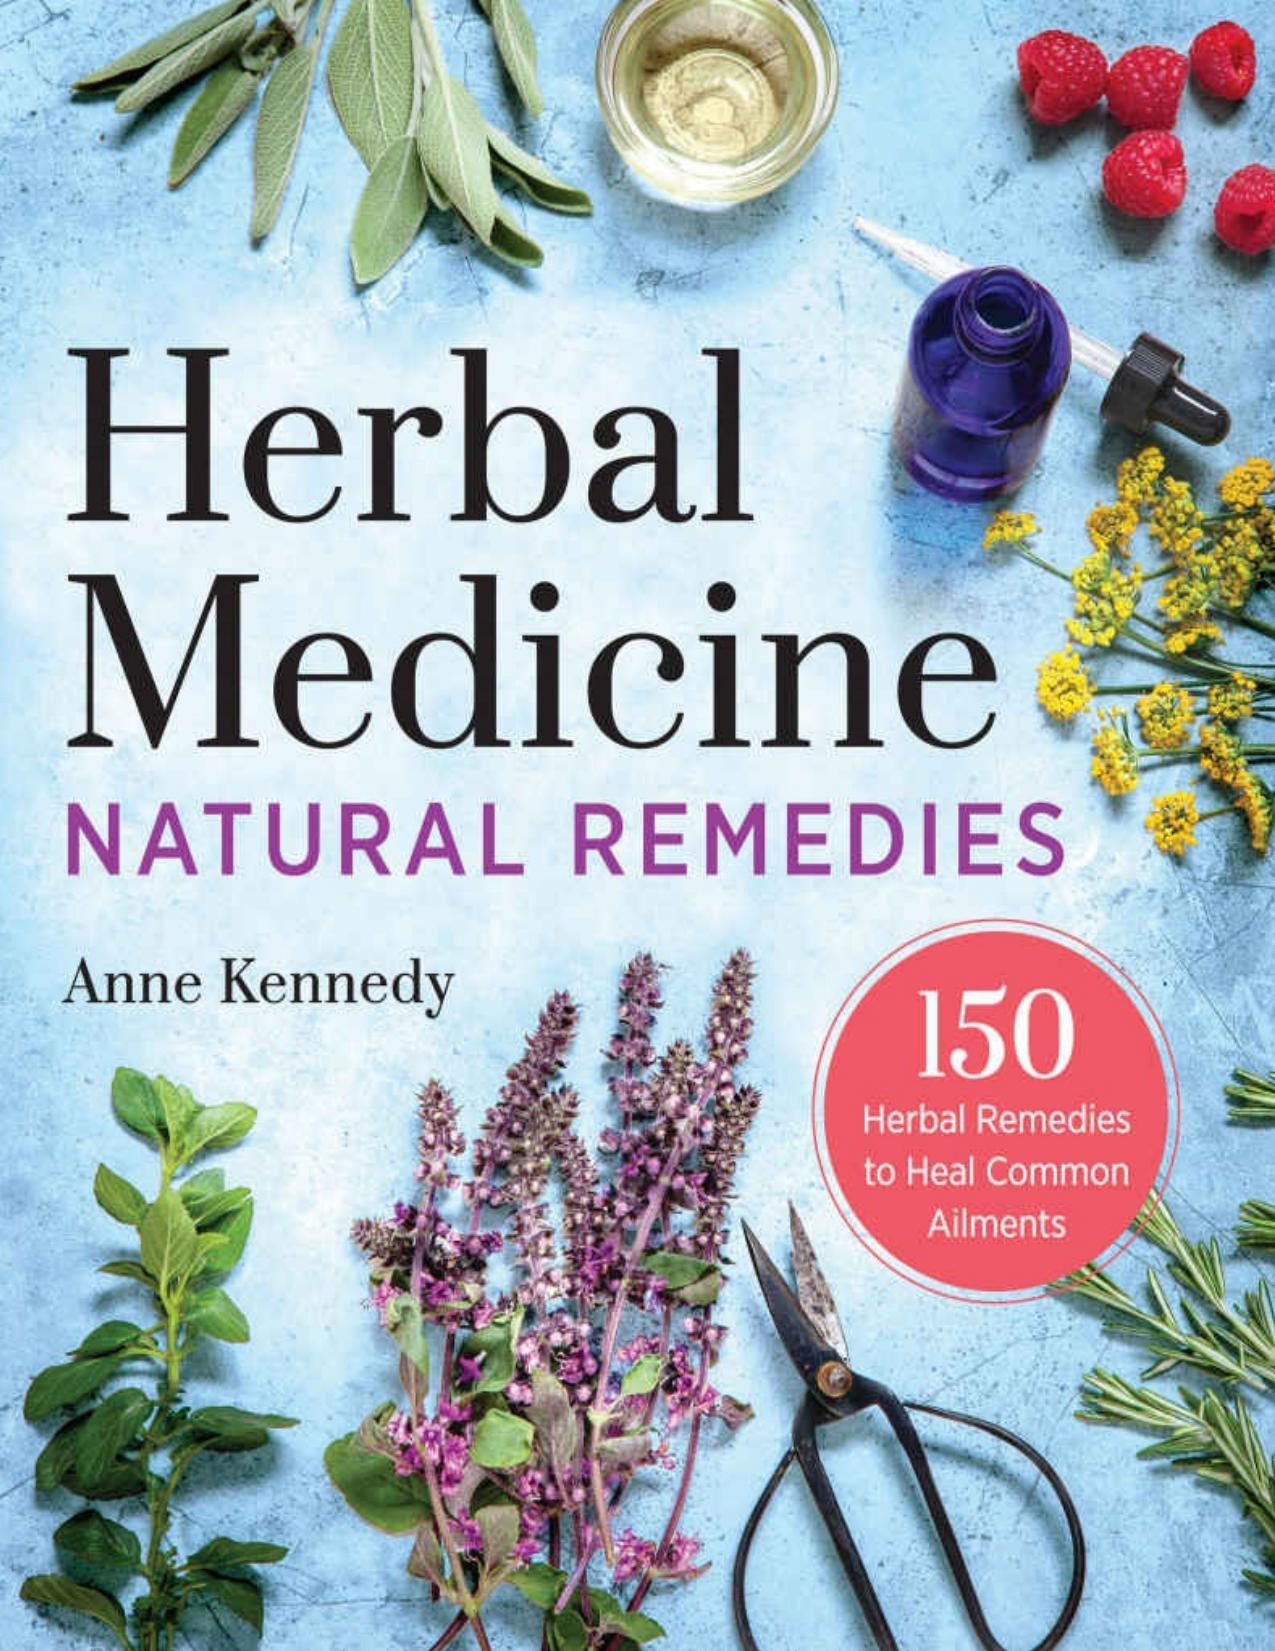 Herbal Medicine Natural Remedies: 150 Herbal Remedies to Heal Common Ailments - PDFDrive.com